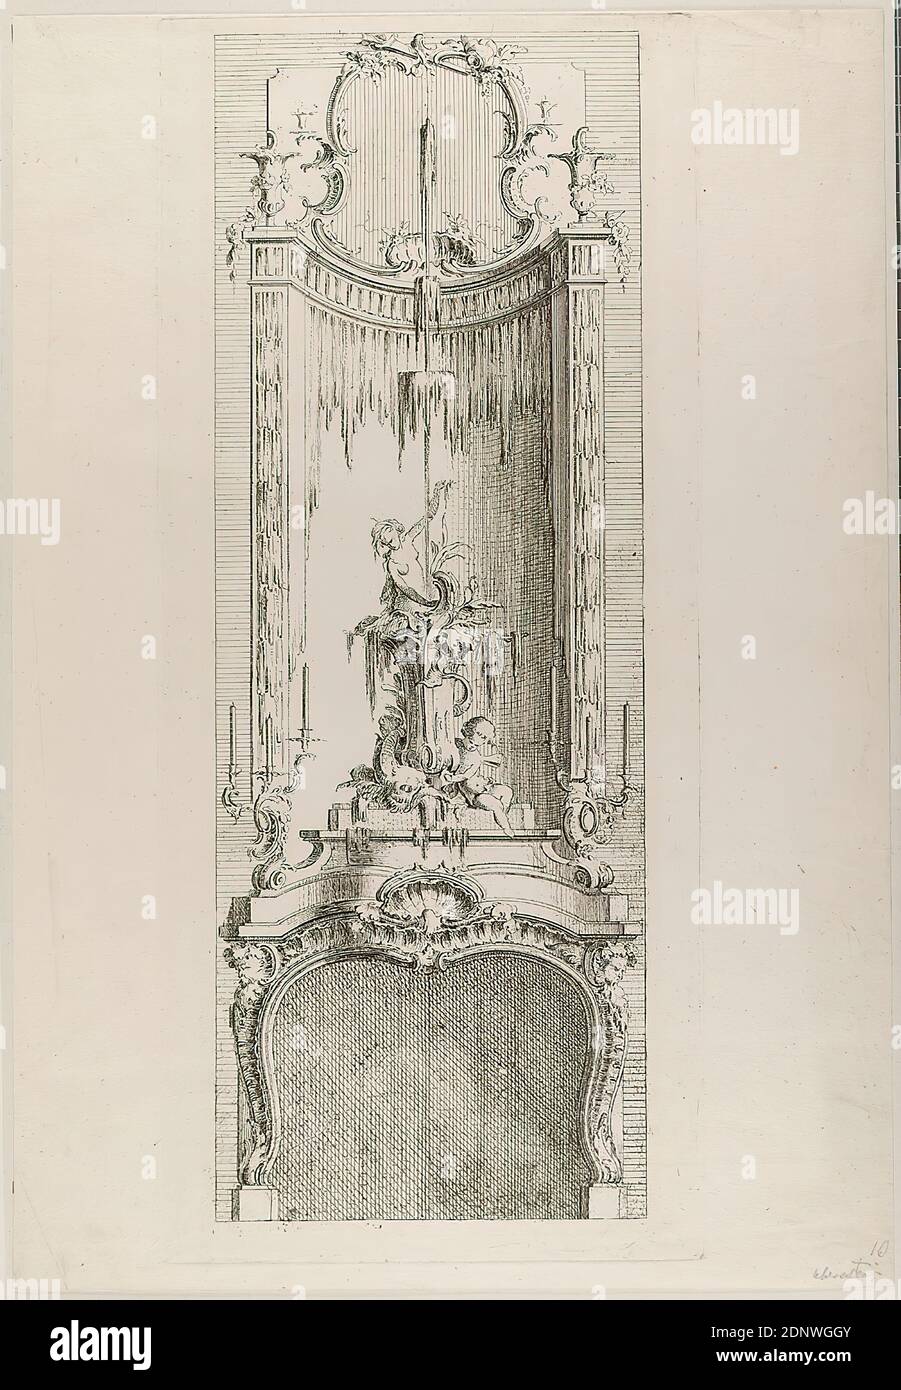 Johann Michael Hoppenhaupt, fireplace, sheet from a series, paper, etching, sheet size: height: 43.30 cm; width: 29.80 cm, graphics, fireplace, rocaille, rococo Stock Photo